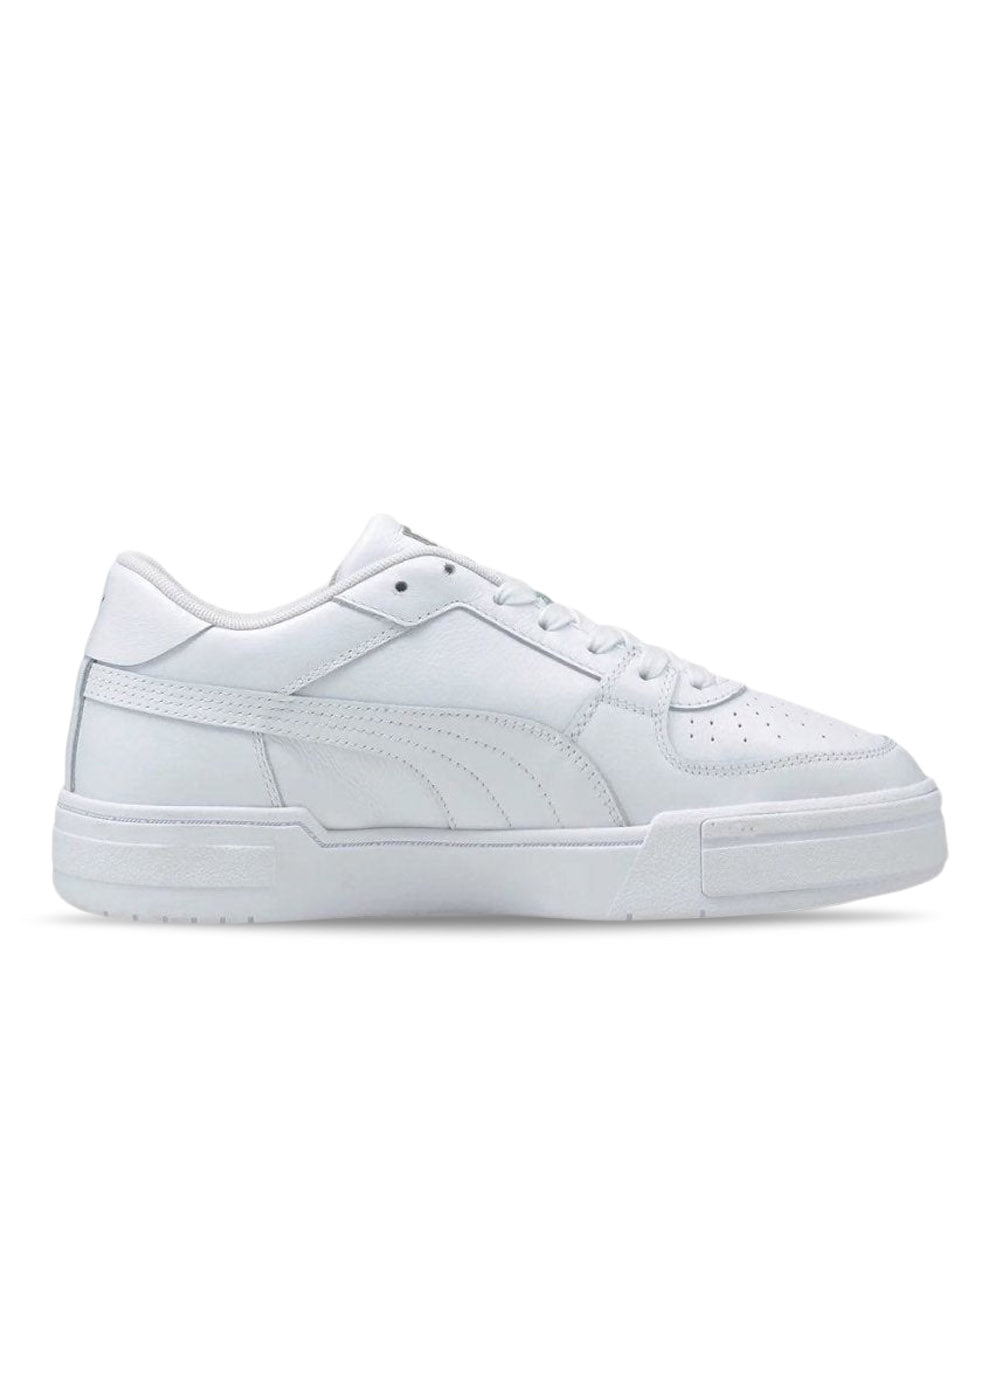 Pumas CA Pro Classic Puma - White. Køb sneakers her.